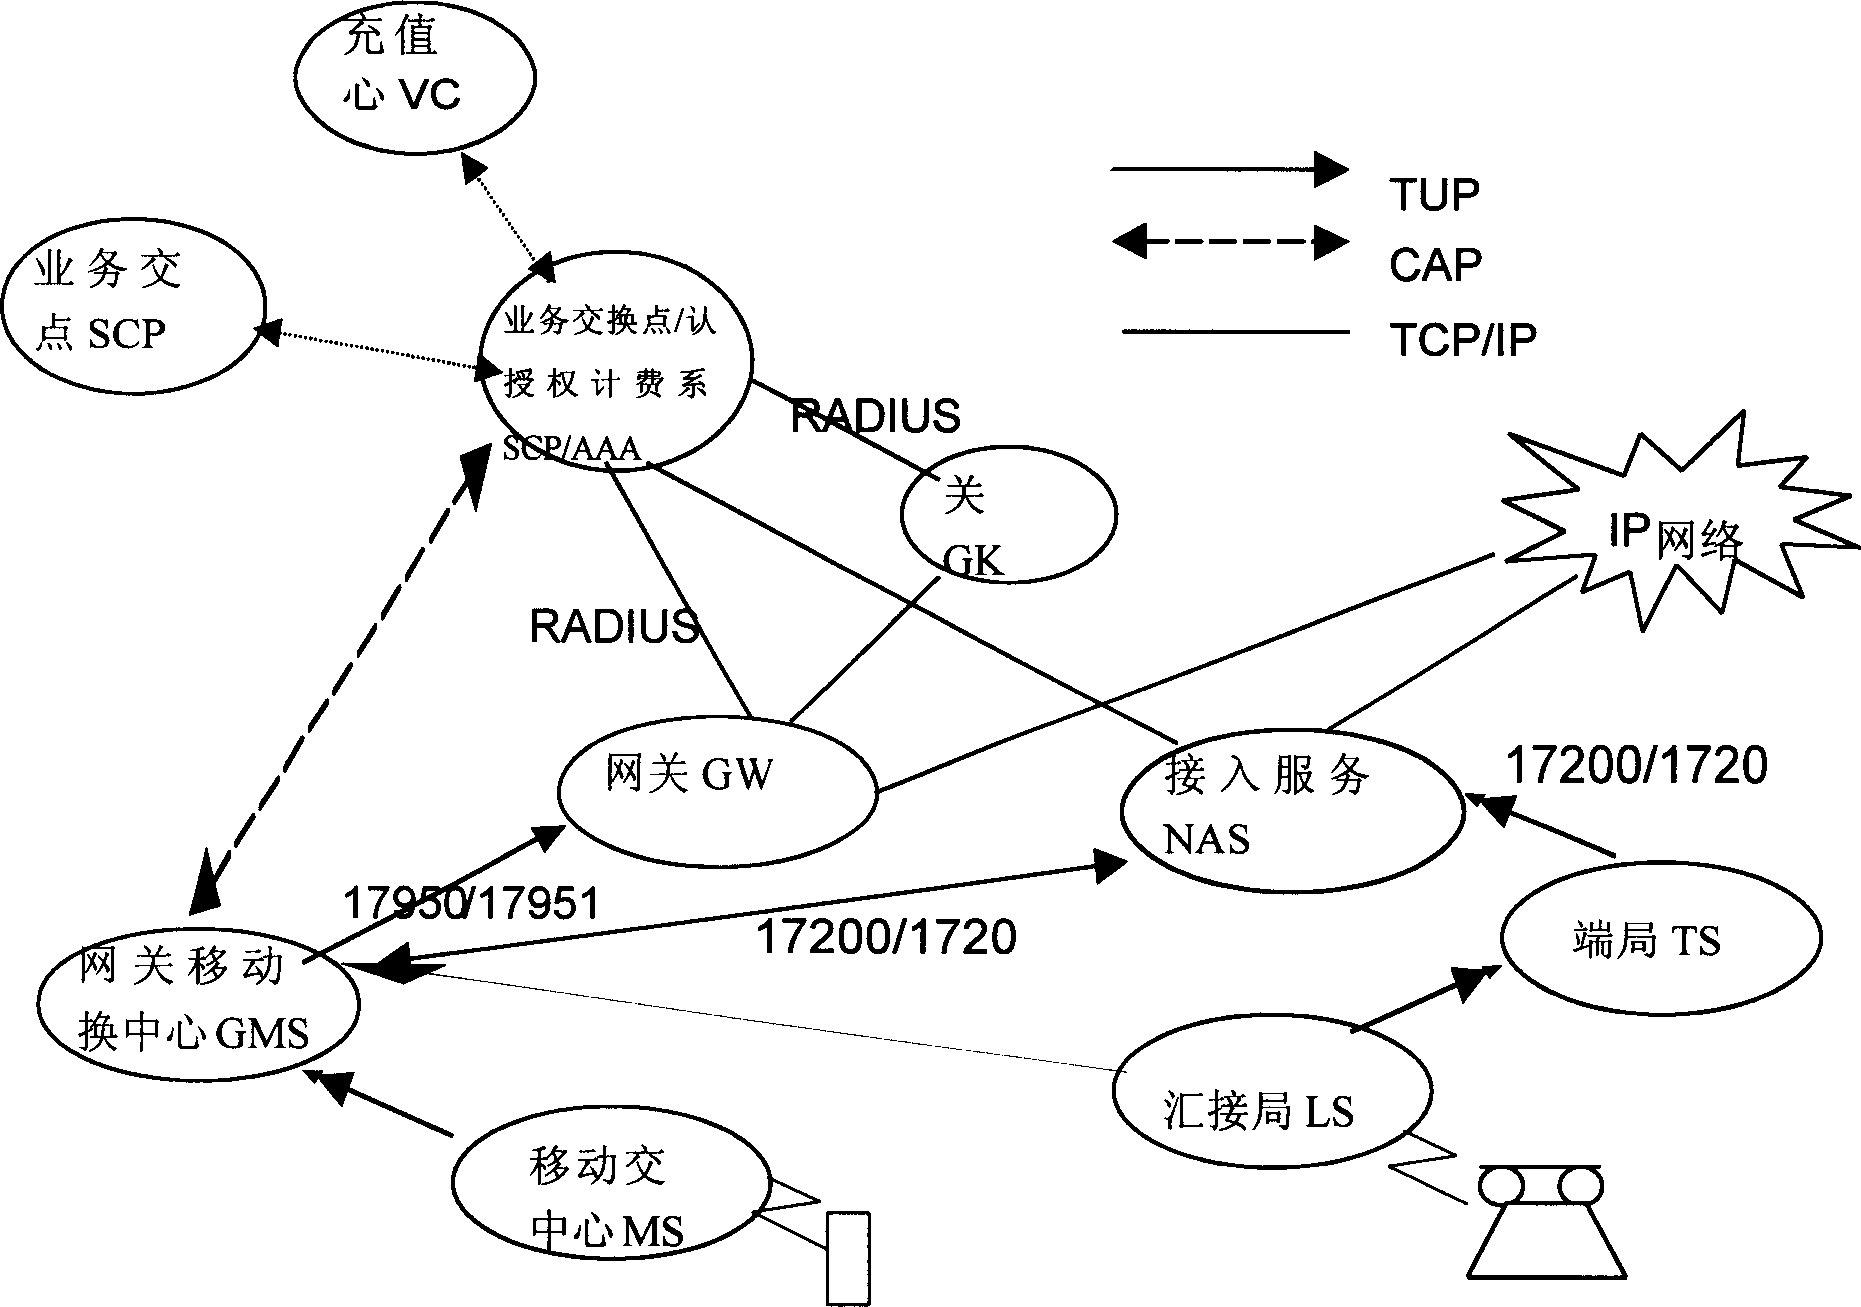 Method of unifying accounts of intelligent network users